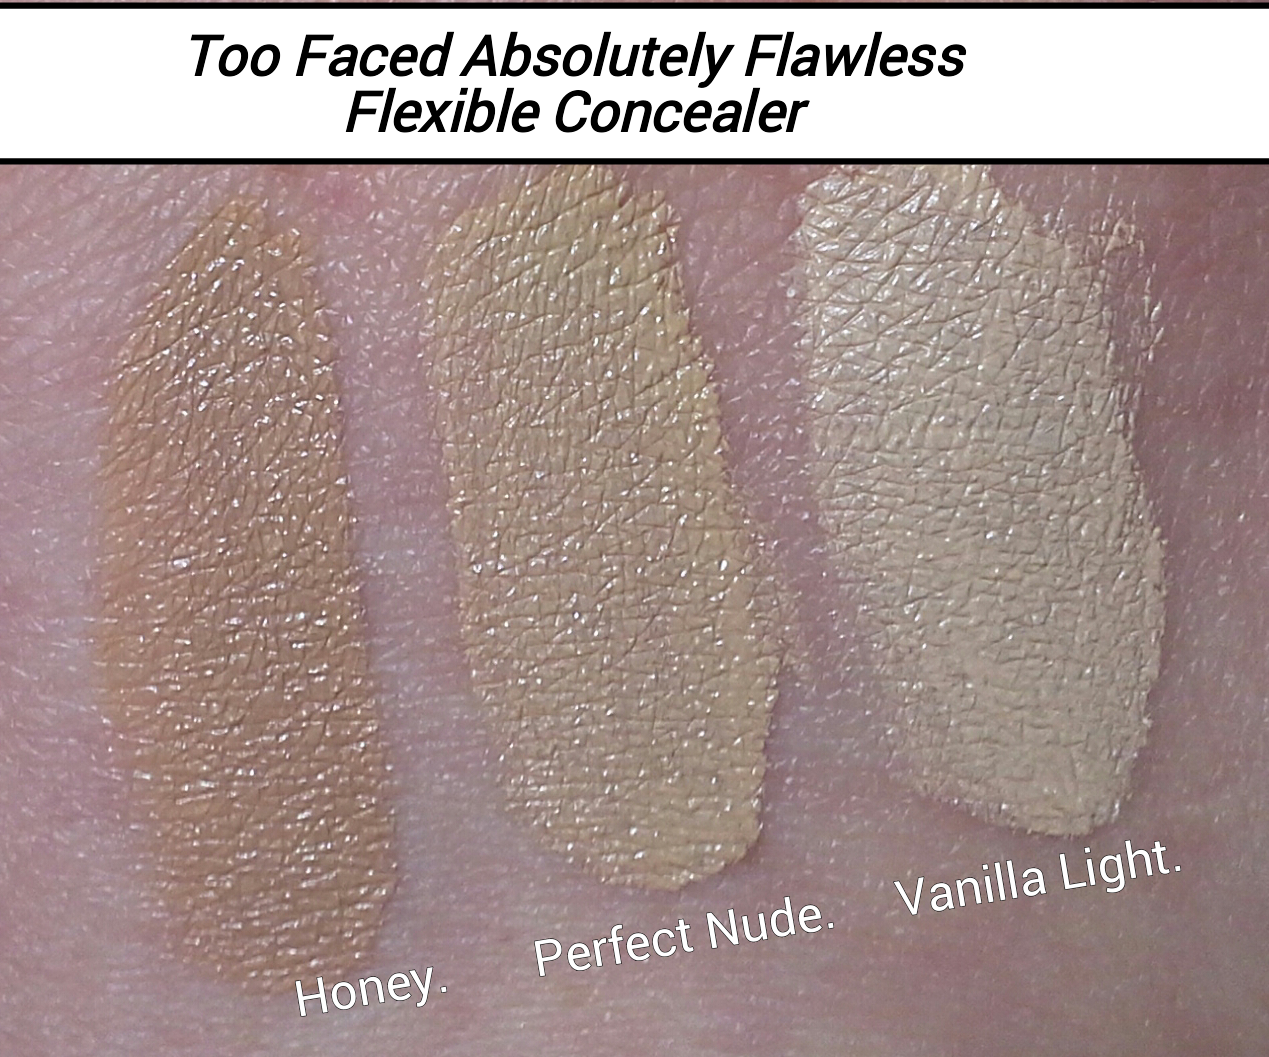 Faced Absolutely Flawless Concealer; Review Swatches of Shades